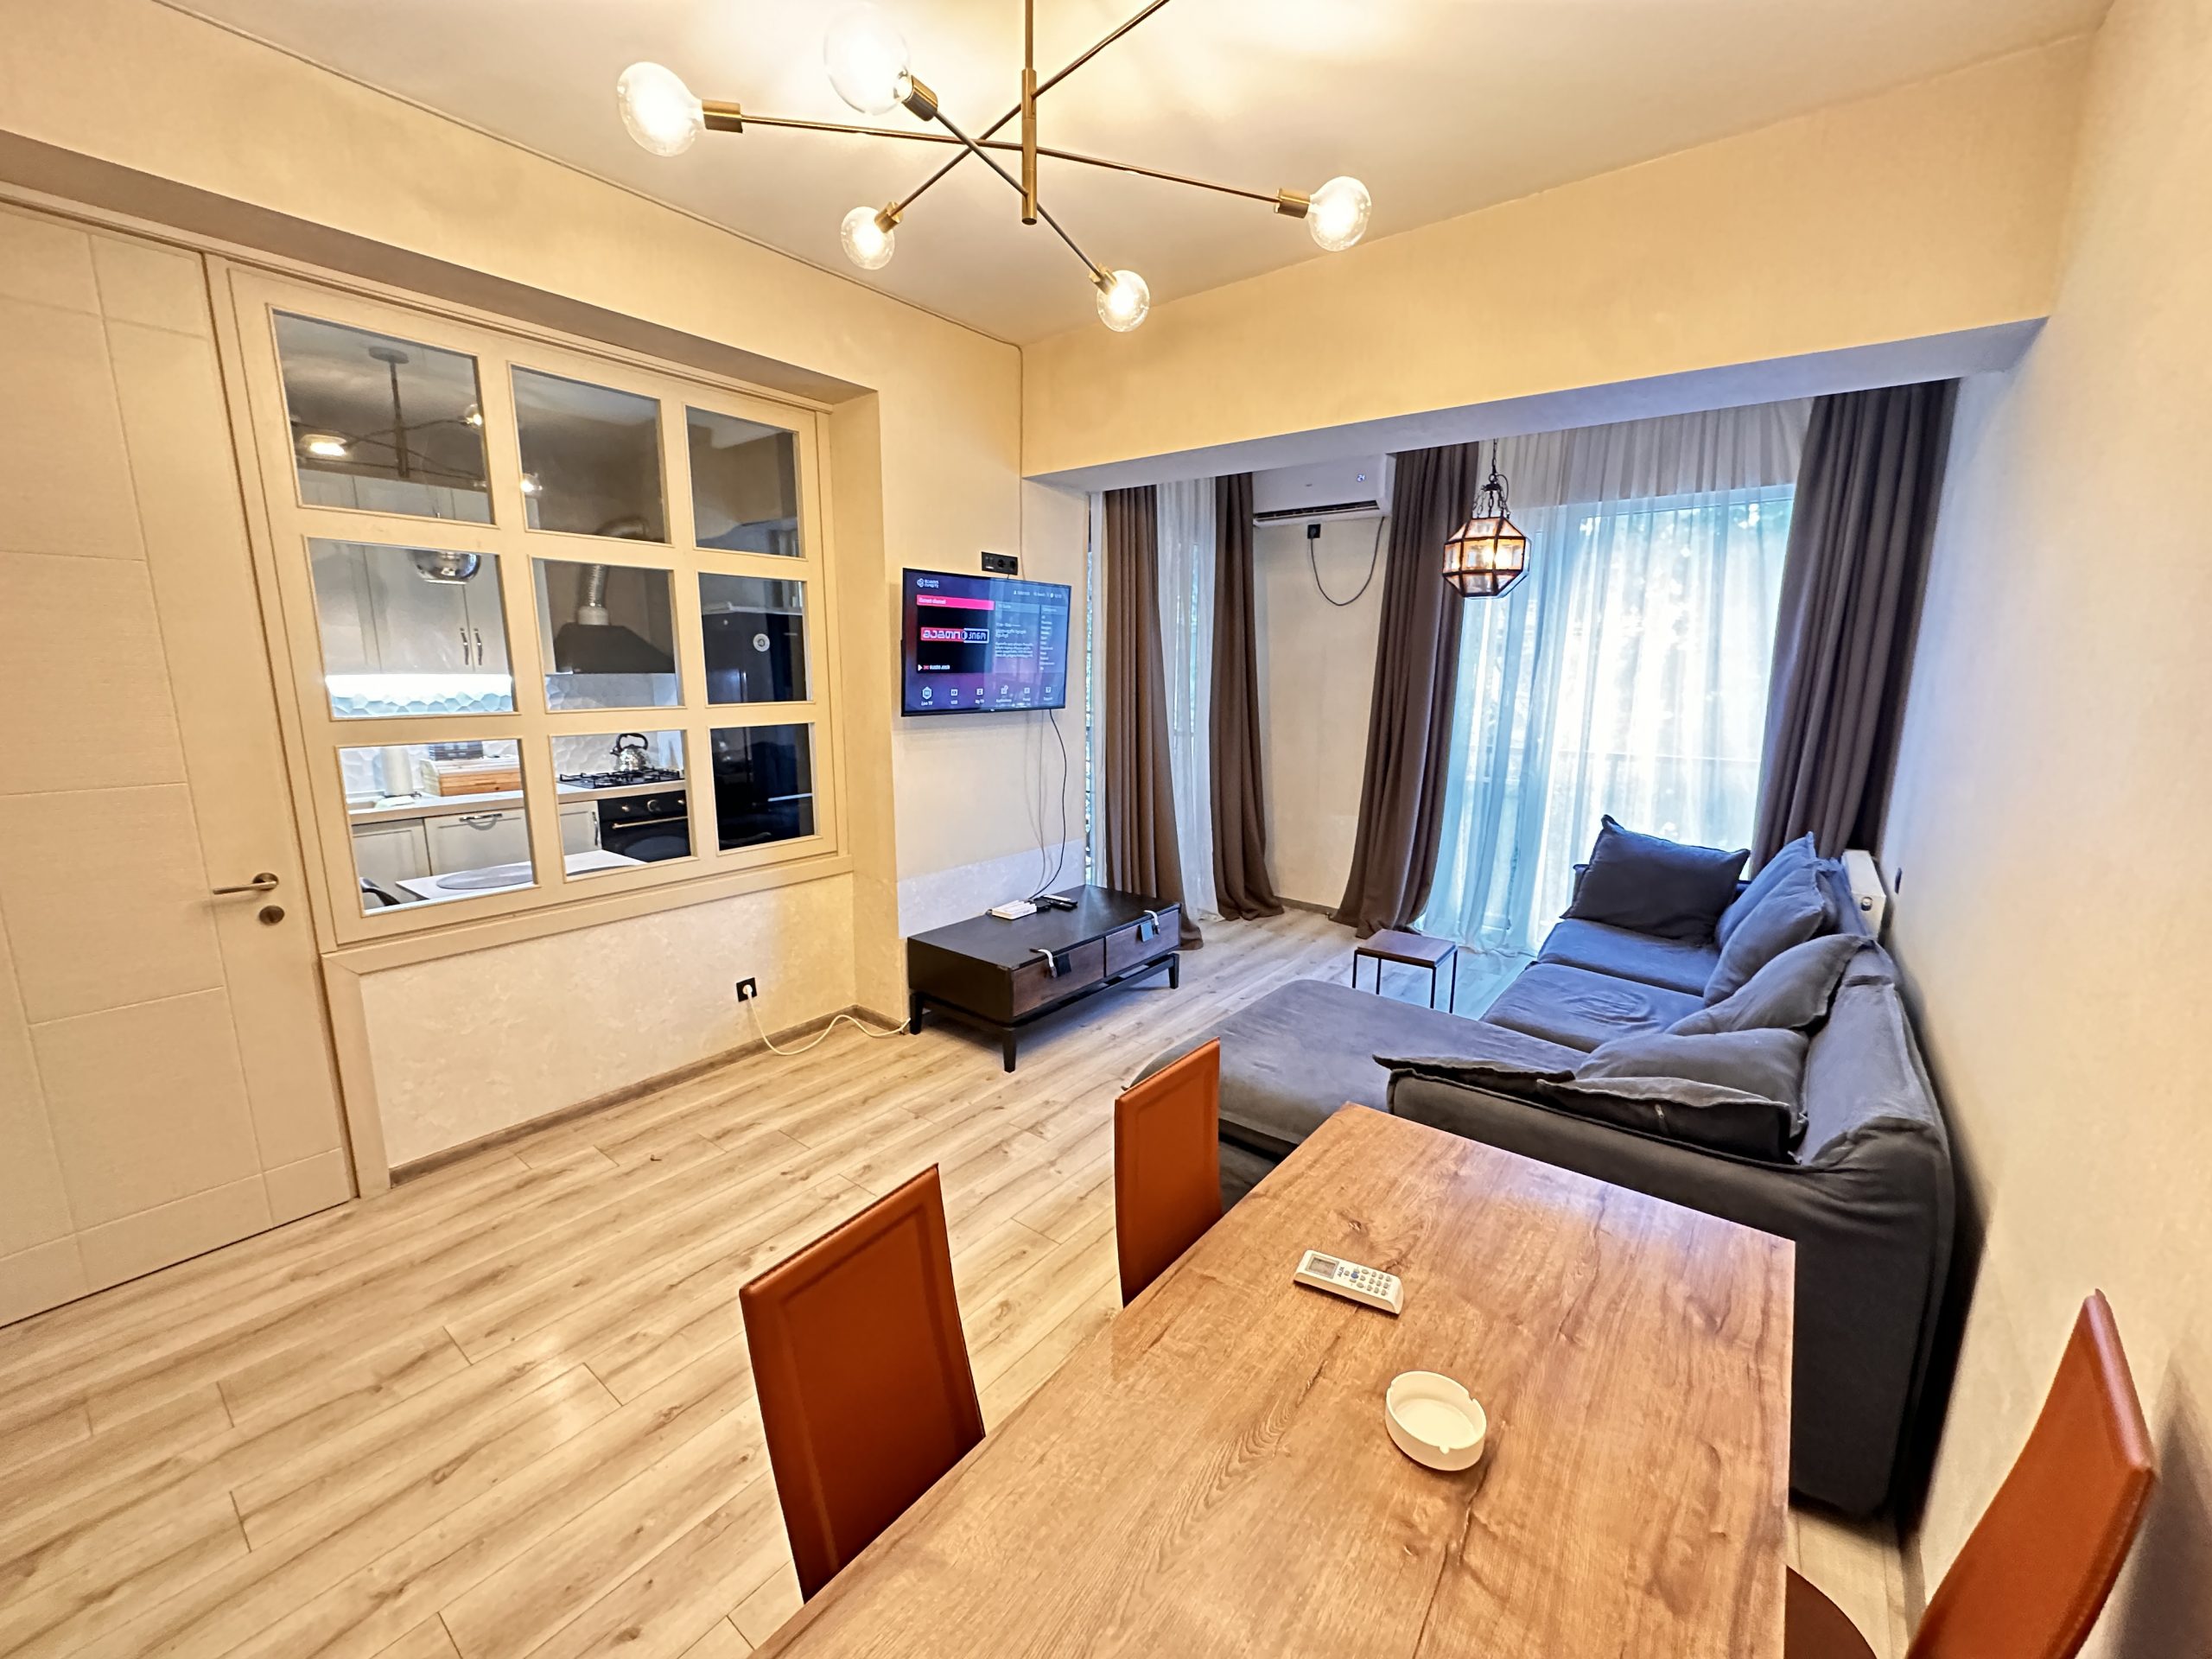 2-Room Apartment For Rent In “Axis” Building, next to Vake Pool